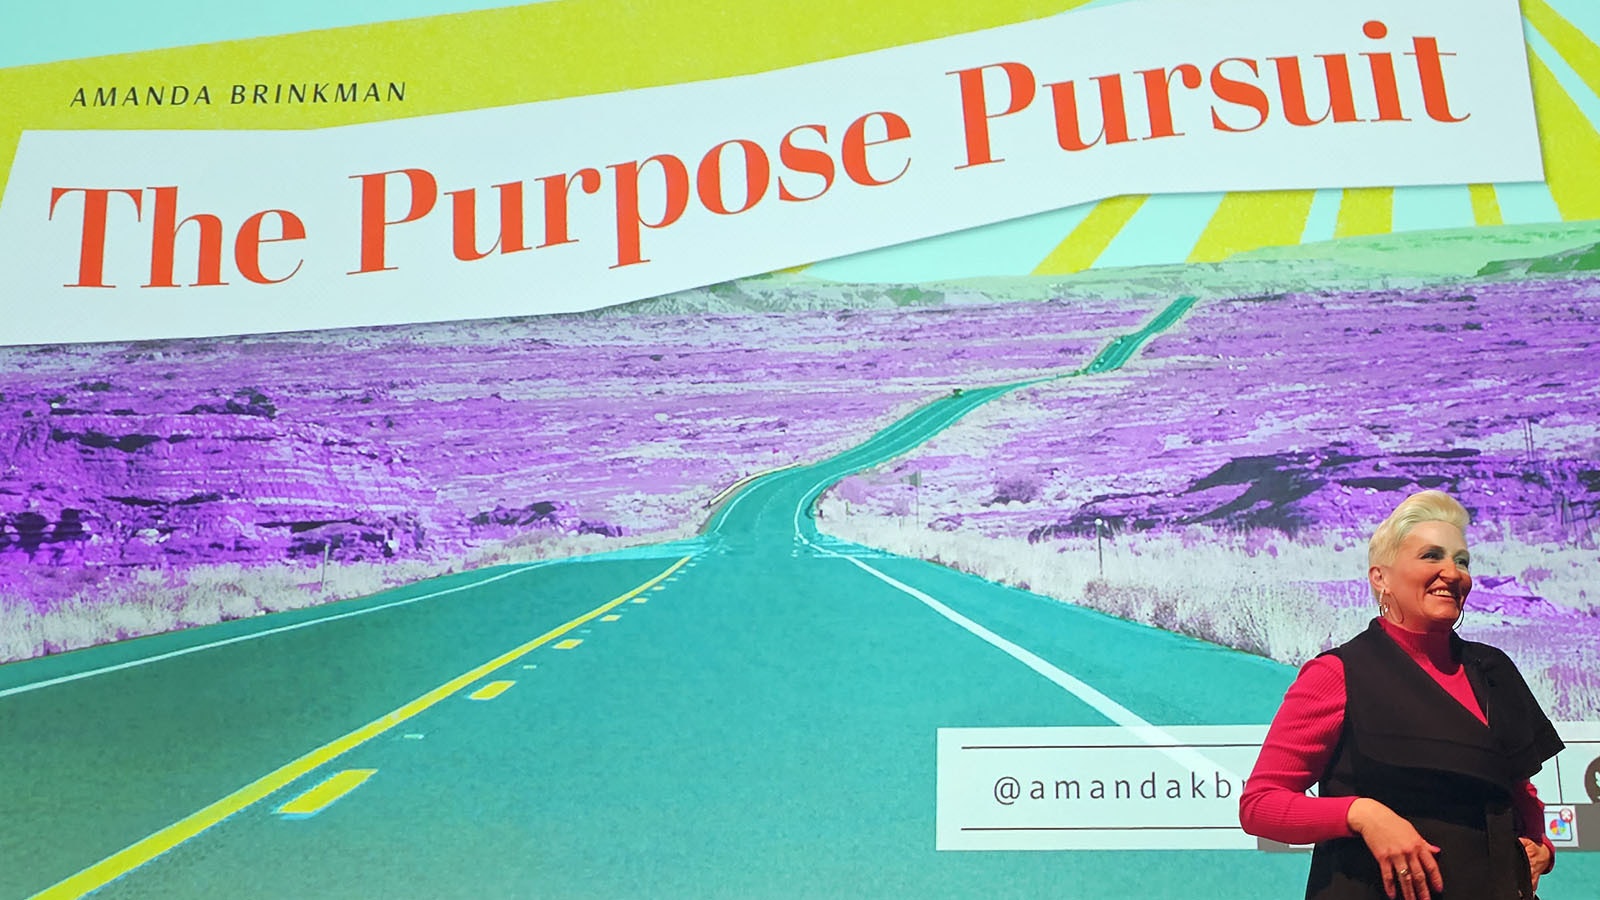 Amanda Brinkman also shared tips from her personal journey looking for purpose in her life.